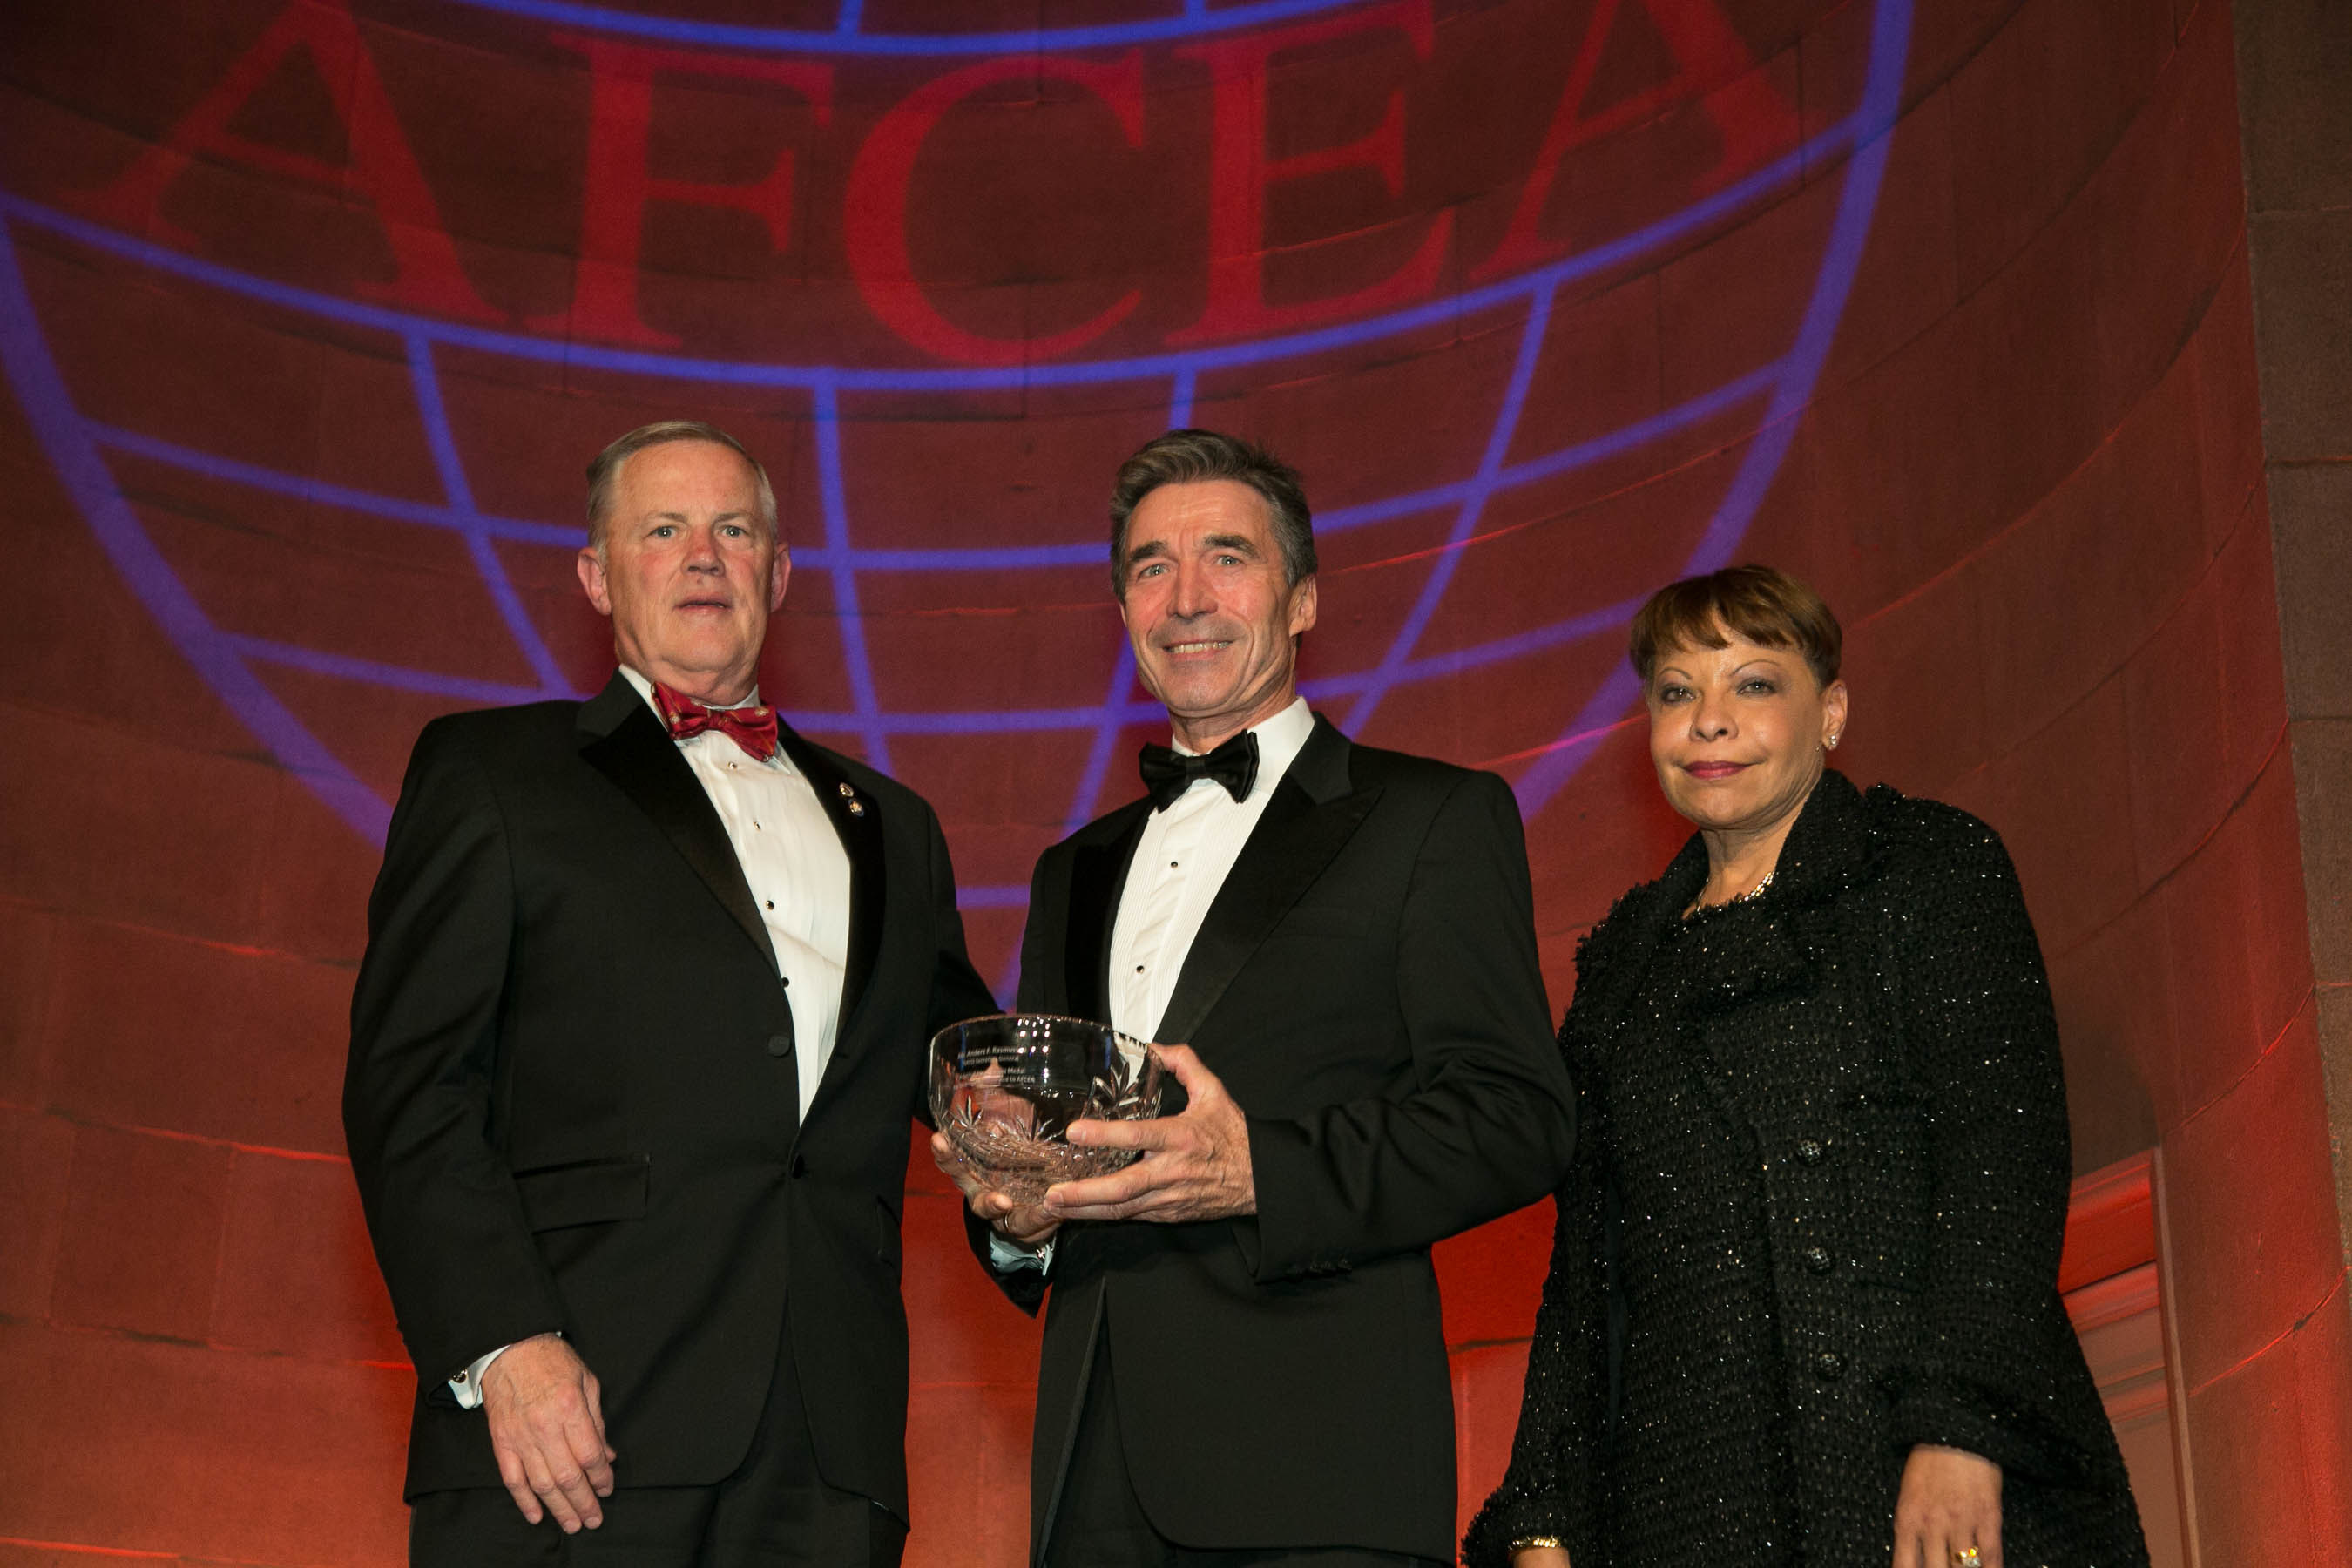 Anders Fogh Rasmussen (c), former secretary general, NATO, receives the 2014 Admiral Jon L. Boyes Medal for Distinguished Service to AFCEA from Lt. Gen. Robert M. Shea, USMC (Ret.) (l), president and chief executive officer, AFCEA International, and Linda Gooden, chair of the board, AFCEA International.